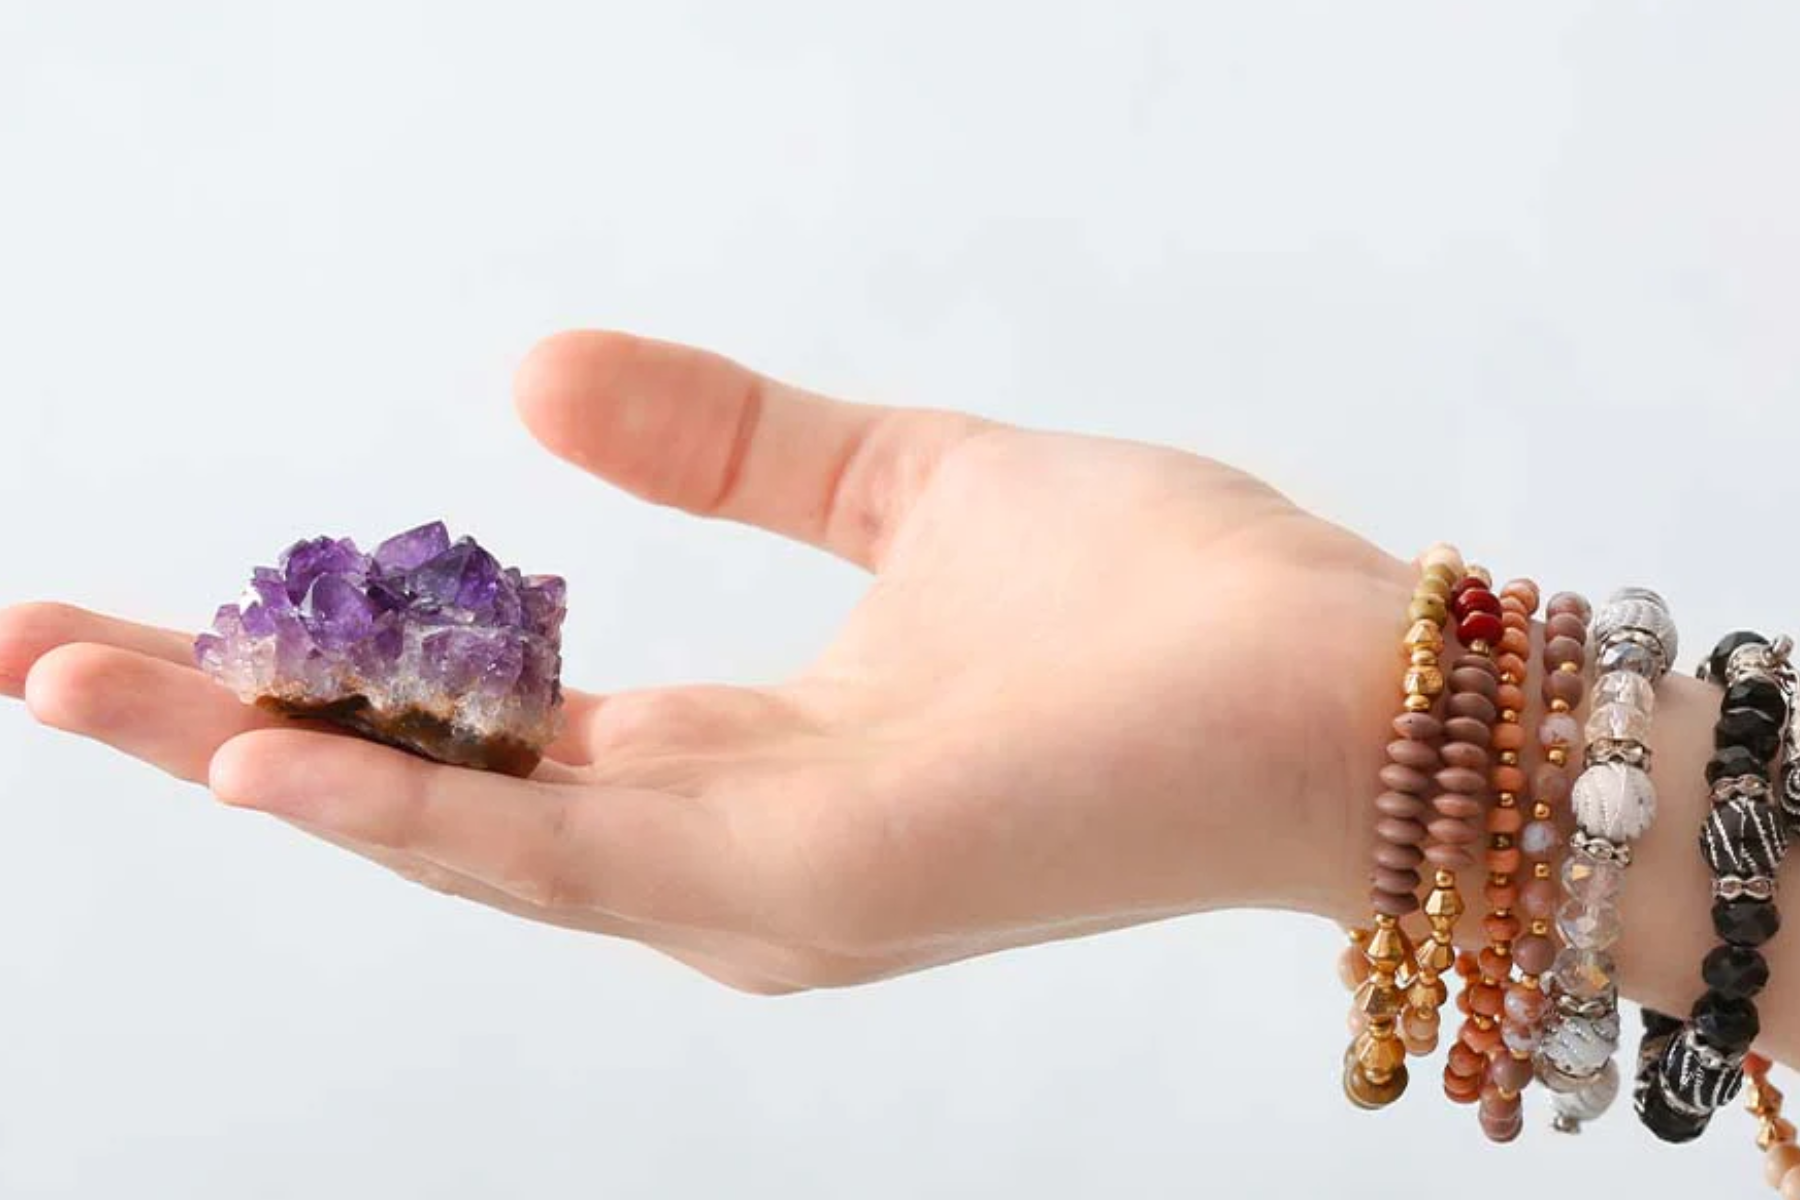 Birthstone Jewelry For Healing And Well-being - The Art Of Self-Care